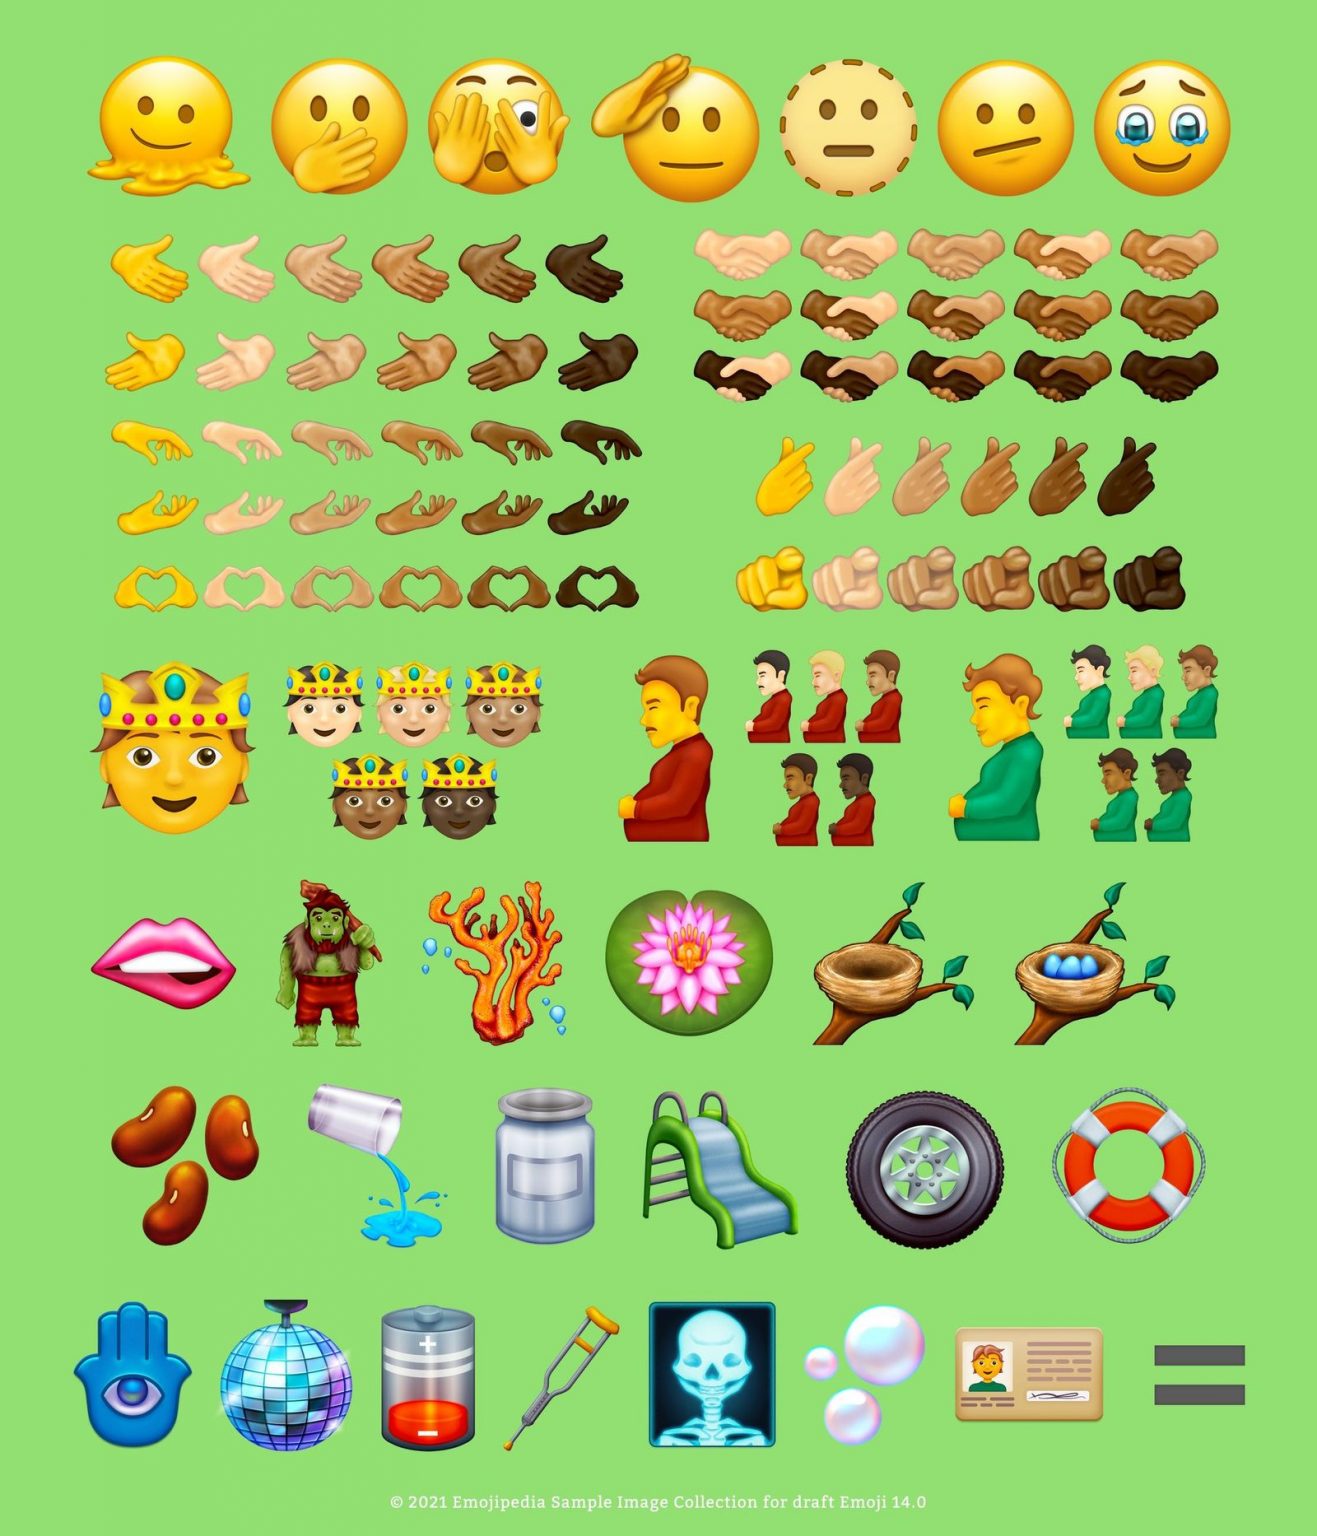 New Emojis 2022 The next batch of Emojis have been announced PlanHub